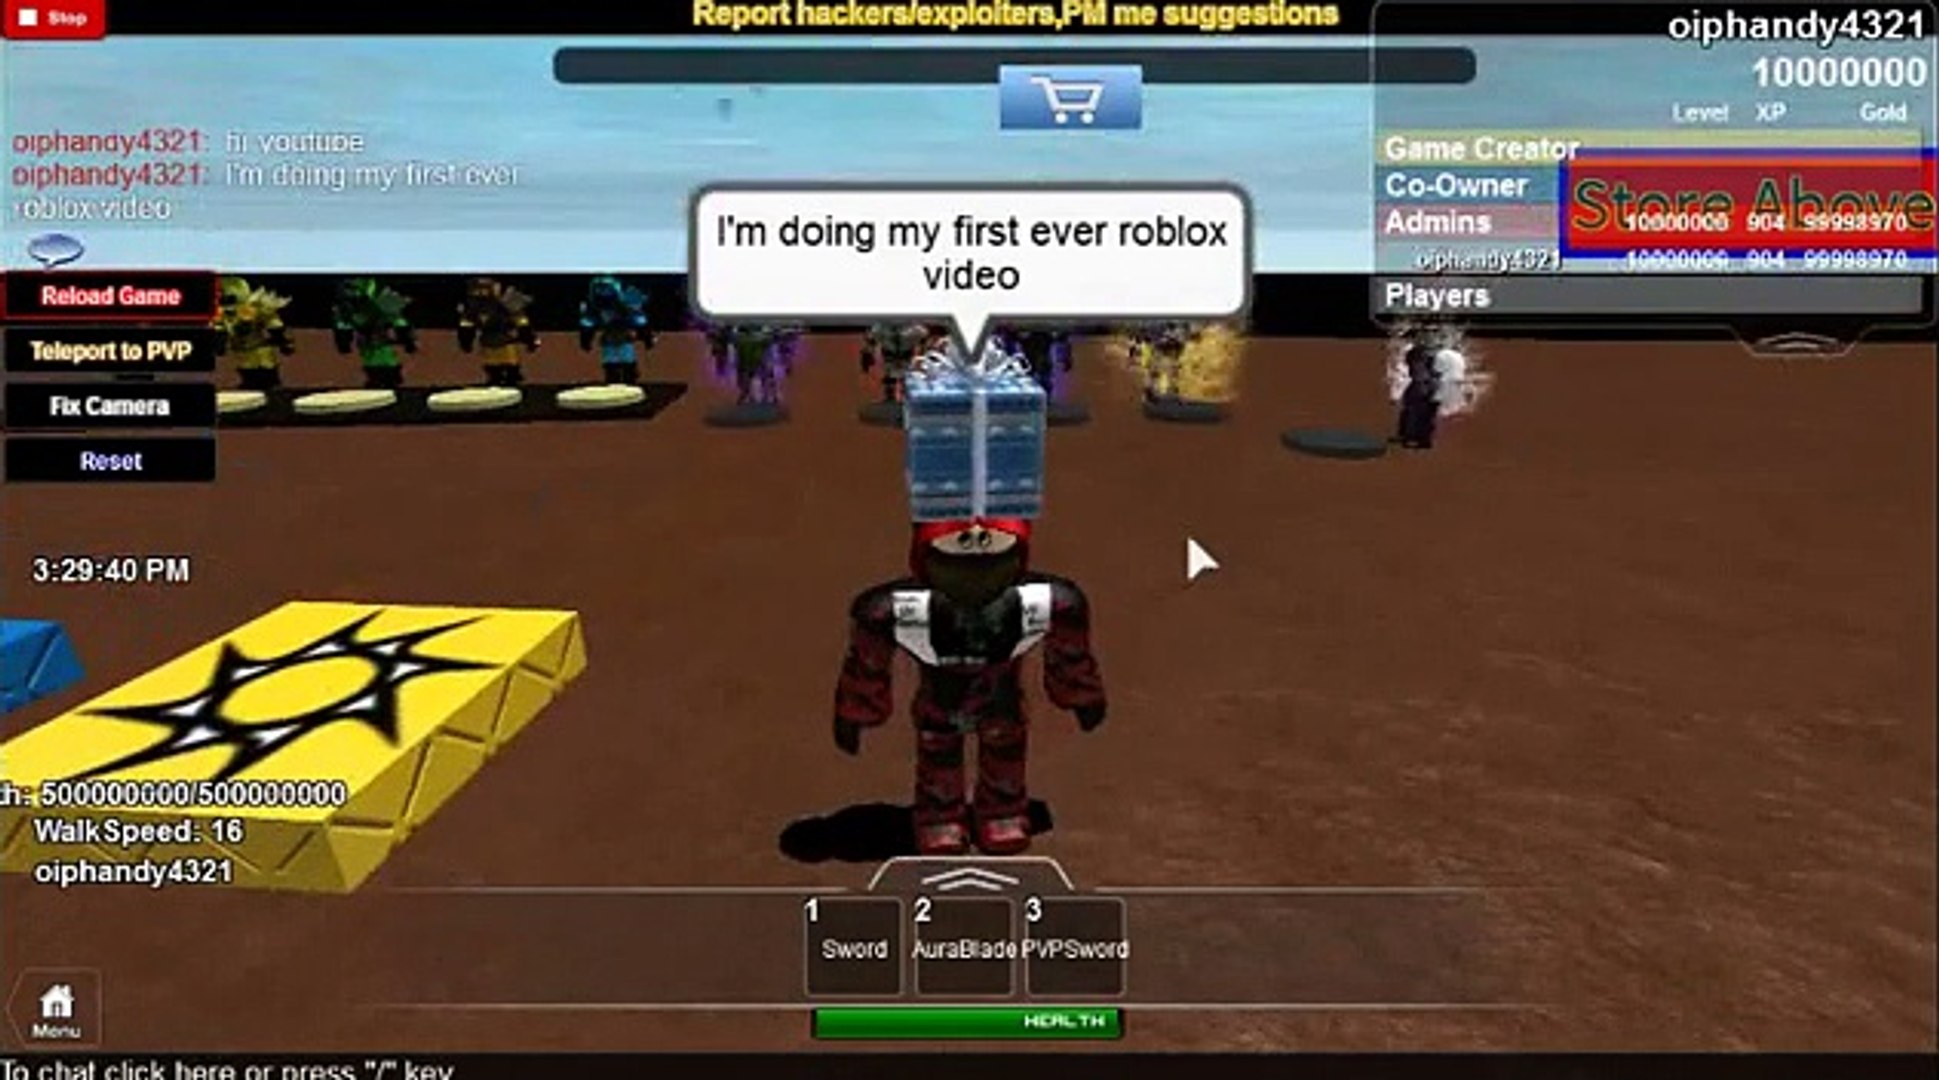 Coolest Rpg Game Ever On Roblox - roblox chat voice video dailymotion